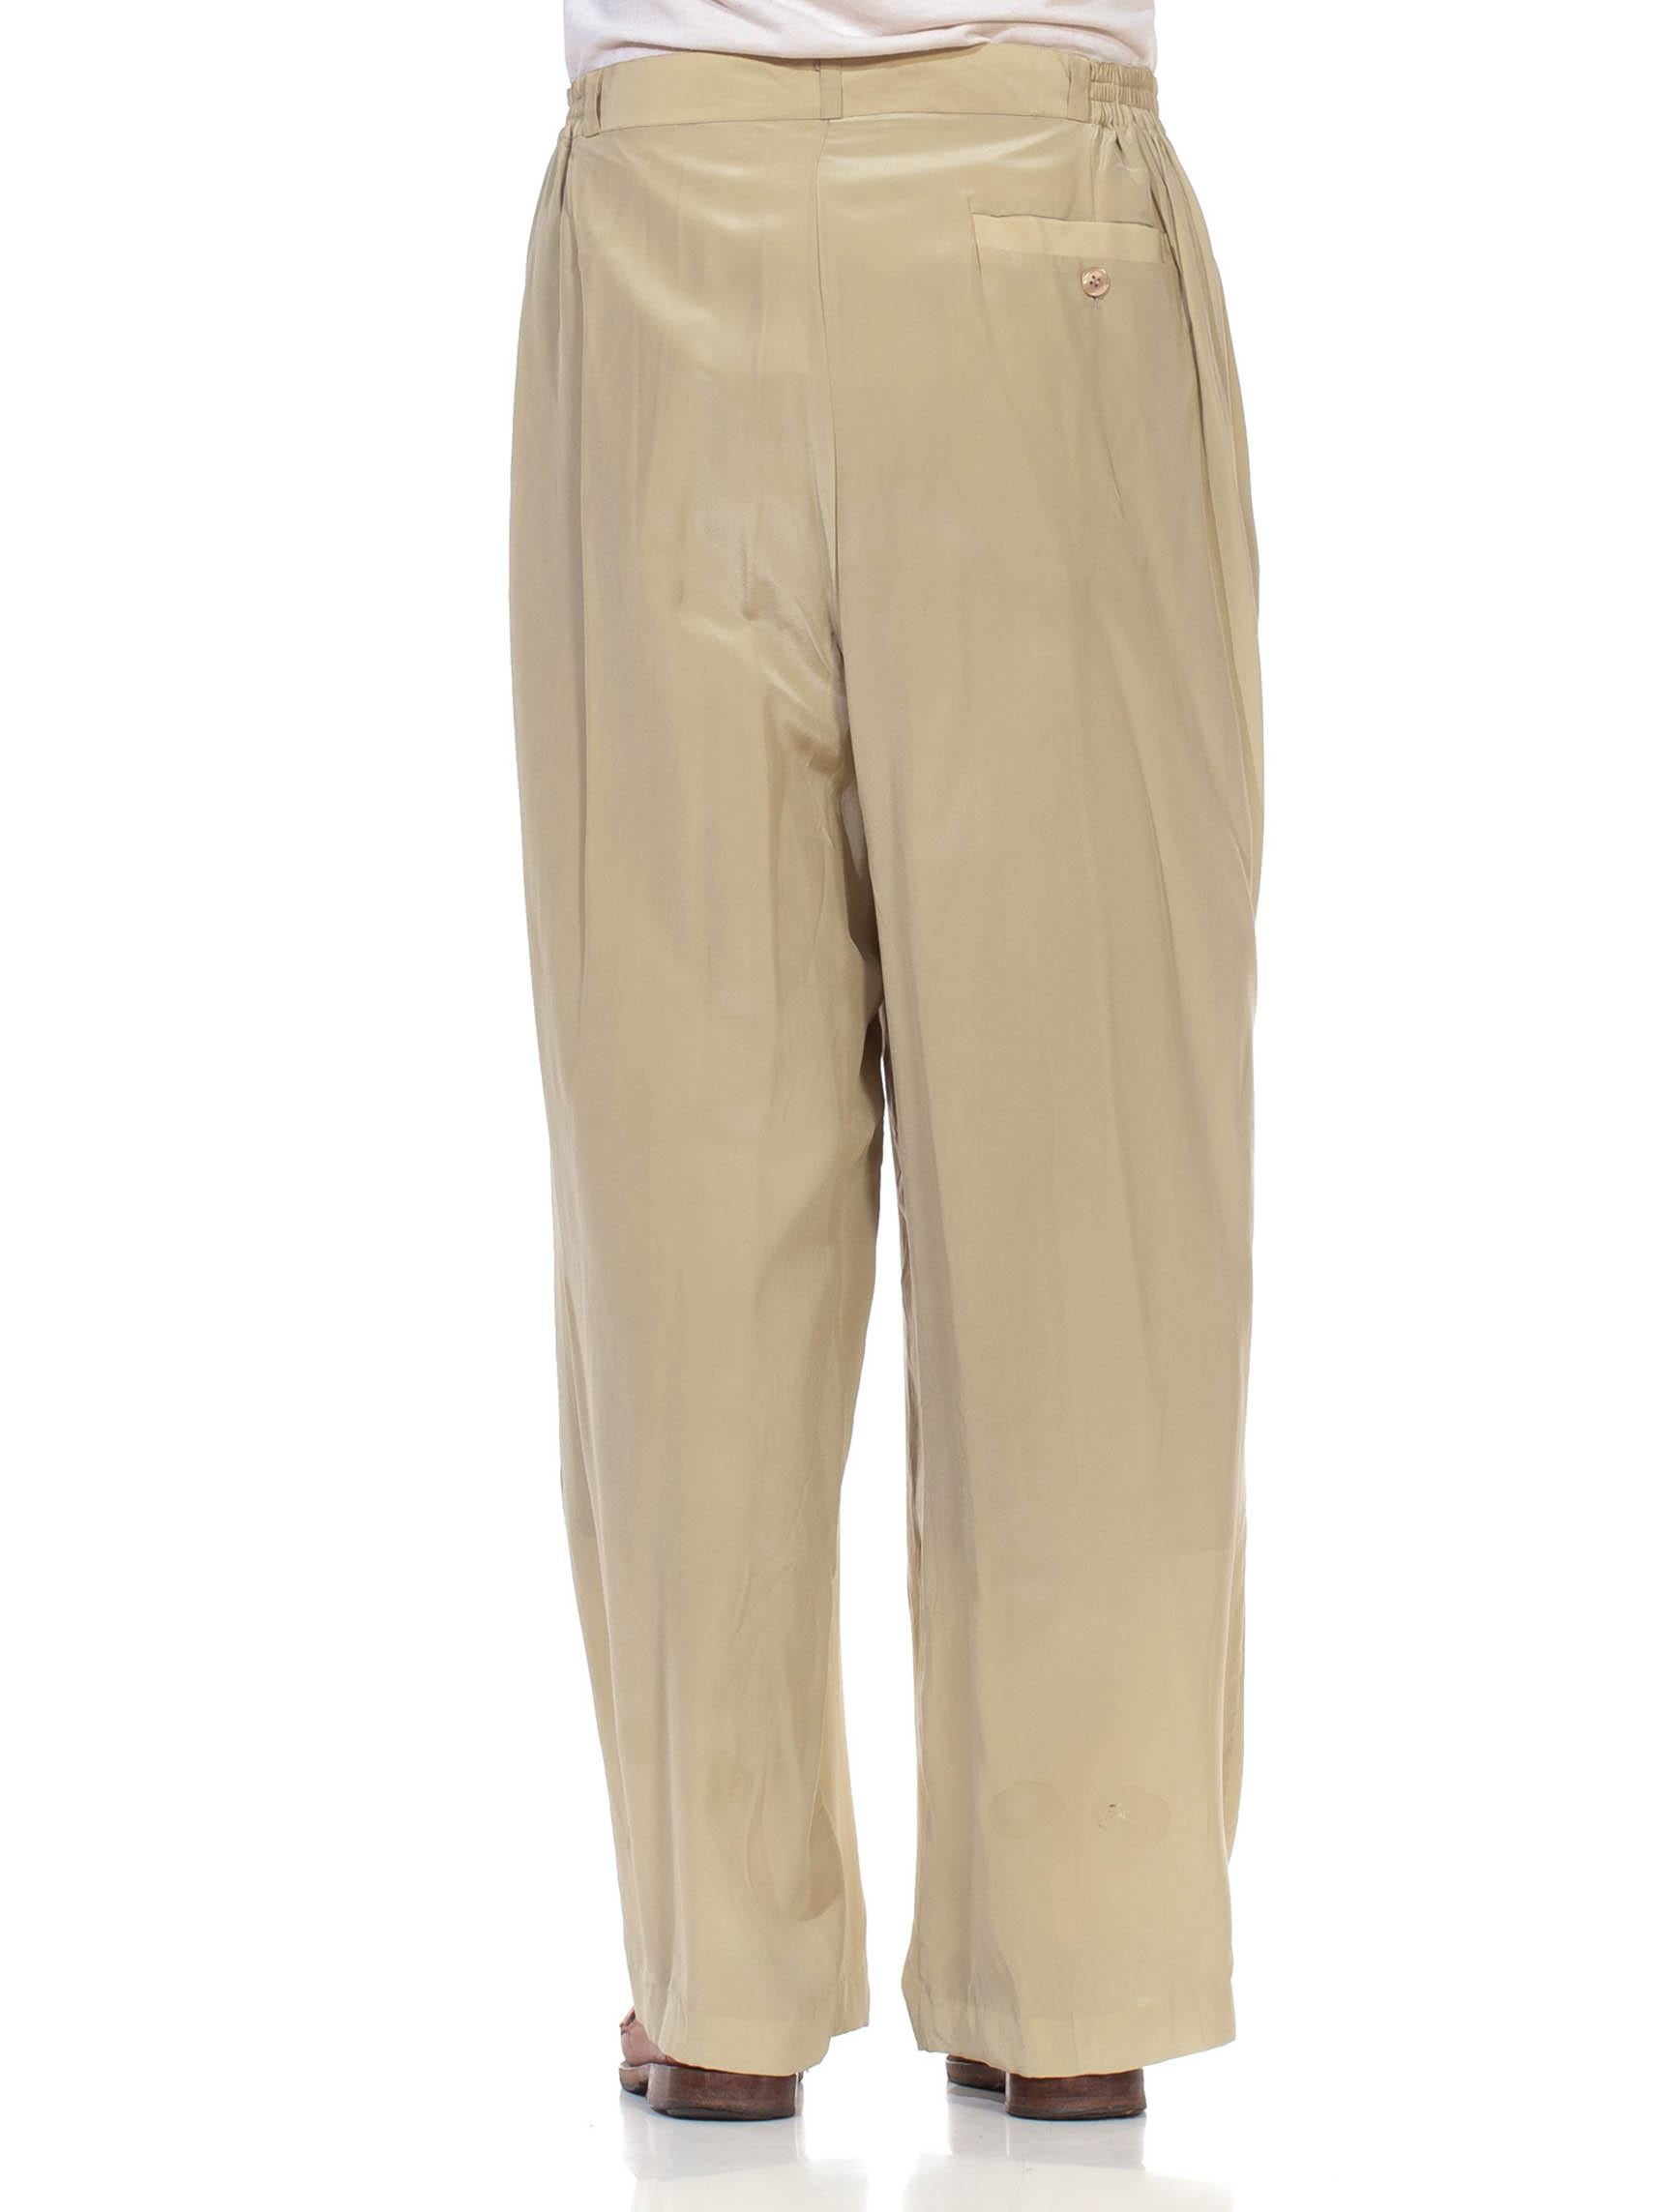 1980S Ecru Silk Crepe De Chine Pleated & Elastic Men's Pants In Excellent Condition For Sale In New York, NY